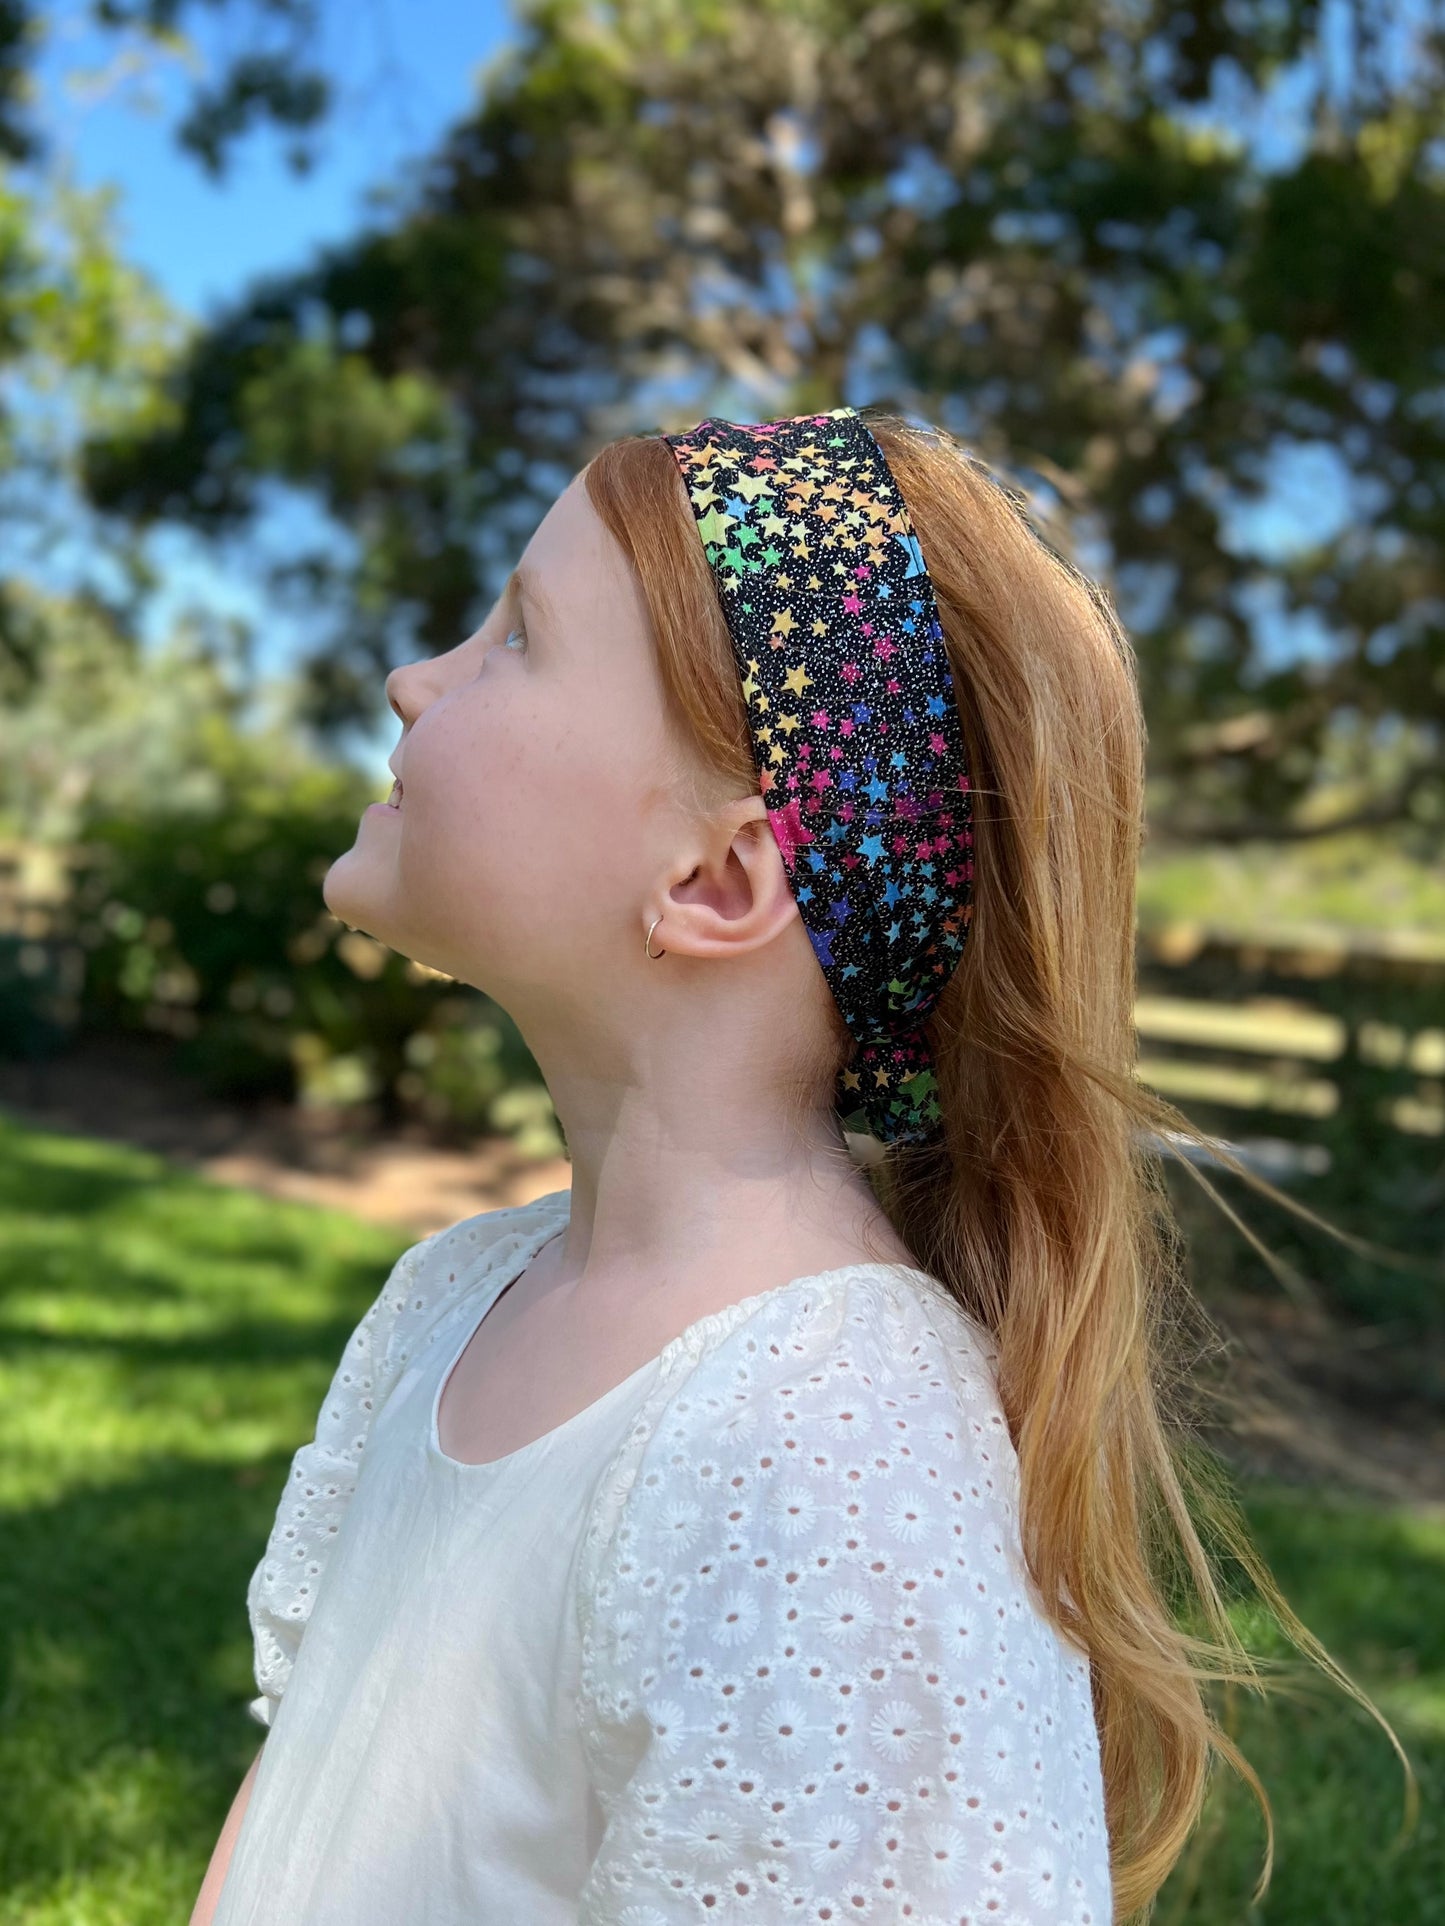 Sparkle Star- Bae Kids Boho Wire Headband - Bae Bands Australia Twist Bow Wire Headband allows for your headband to stay in place all day with no headaches,